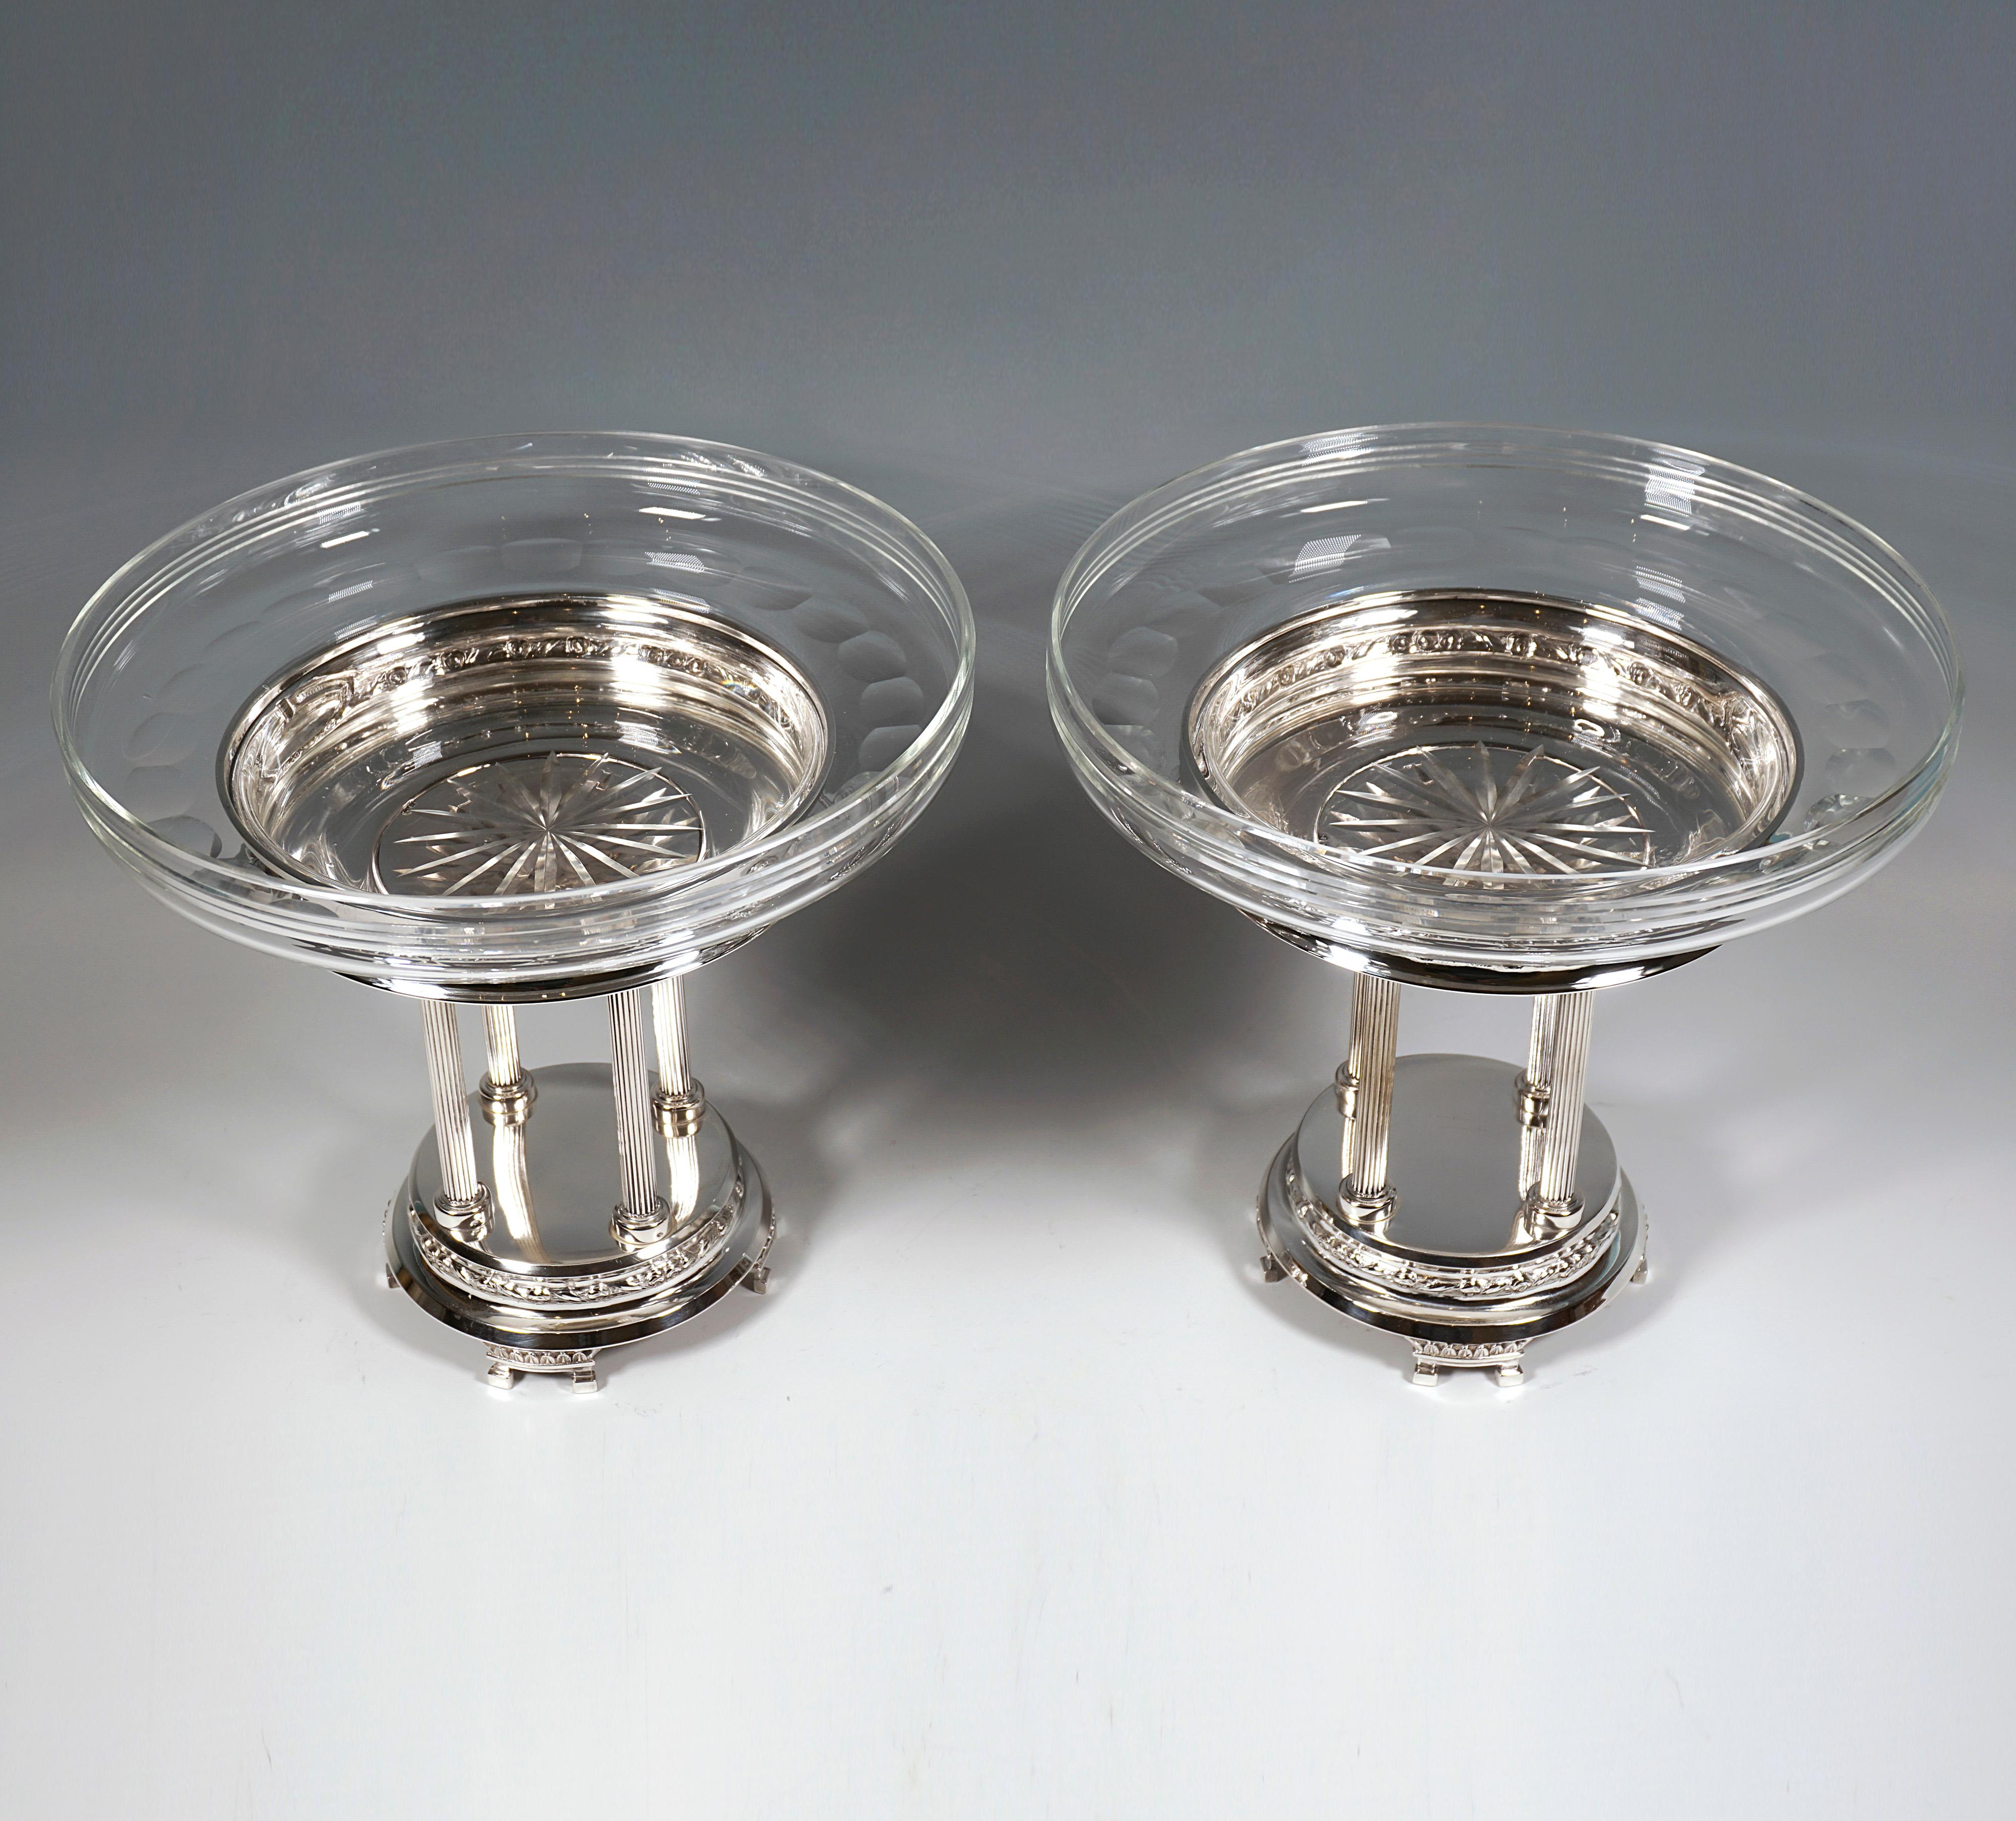 Two elegant silver centerpieces on a high, round, stepped base with a floral relief band, on four divided feet with palmette frieze, on top of which four slender fluted columns arranged in a square, crowned by a projecting silver 
bowl with a floral